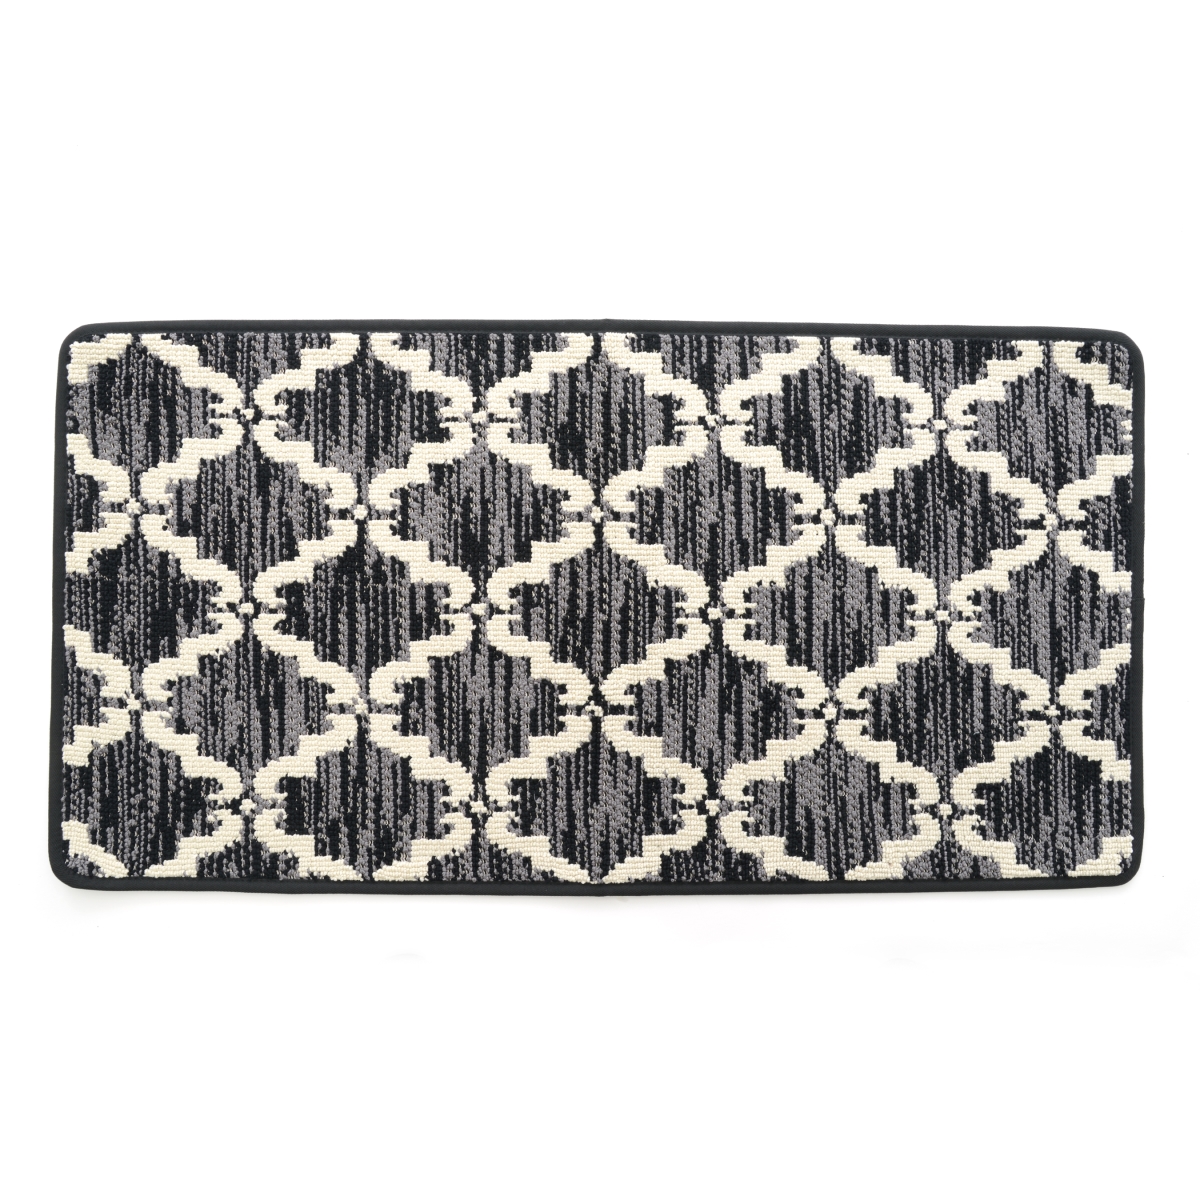 39n-kpl231-12 20 X 39 In. Ultra Plush Pacific Knitted Loop Pile Polyester Bath Mat - Black